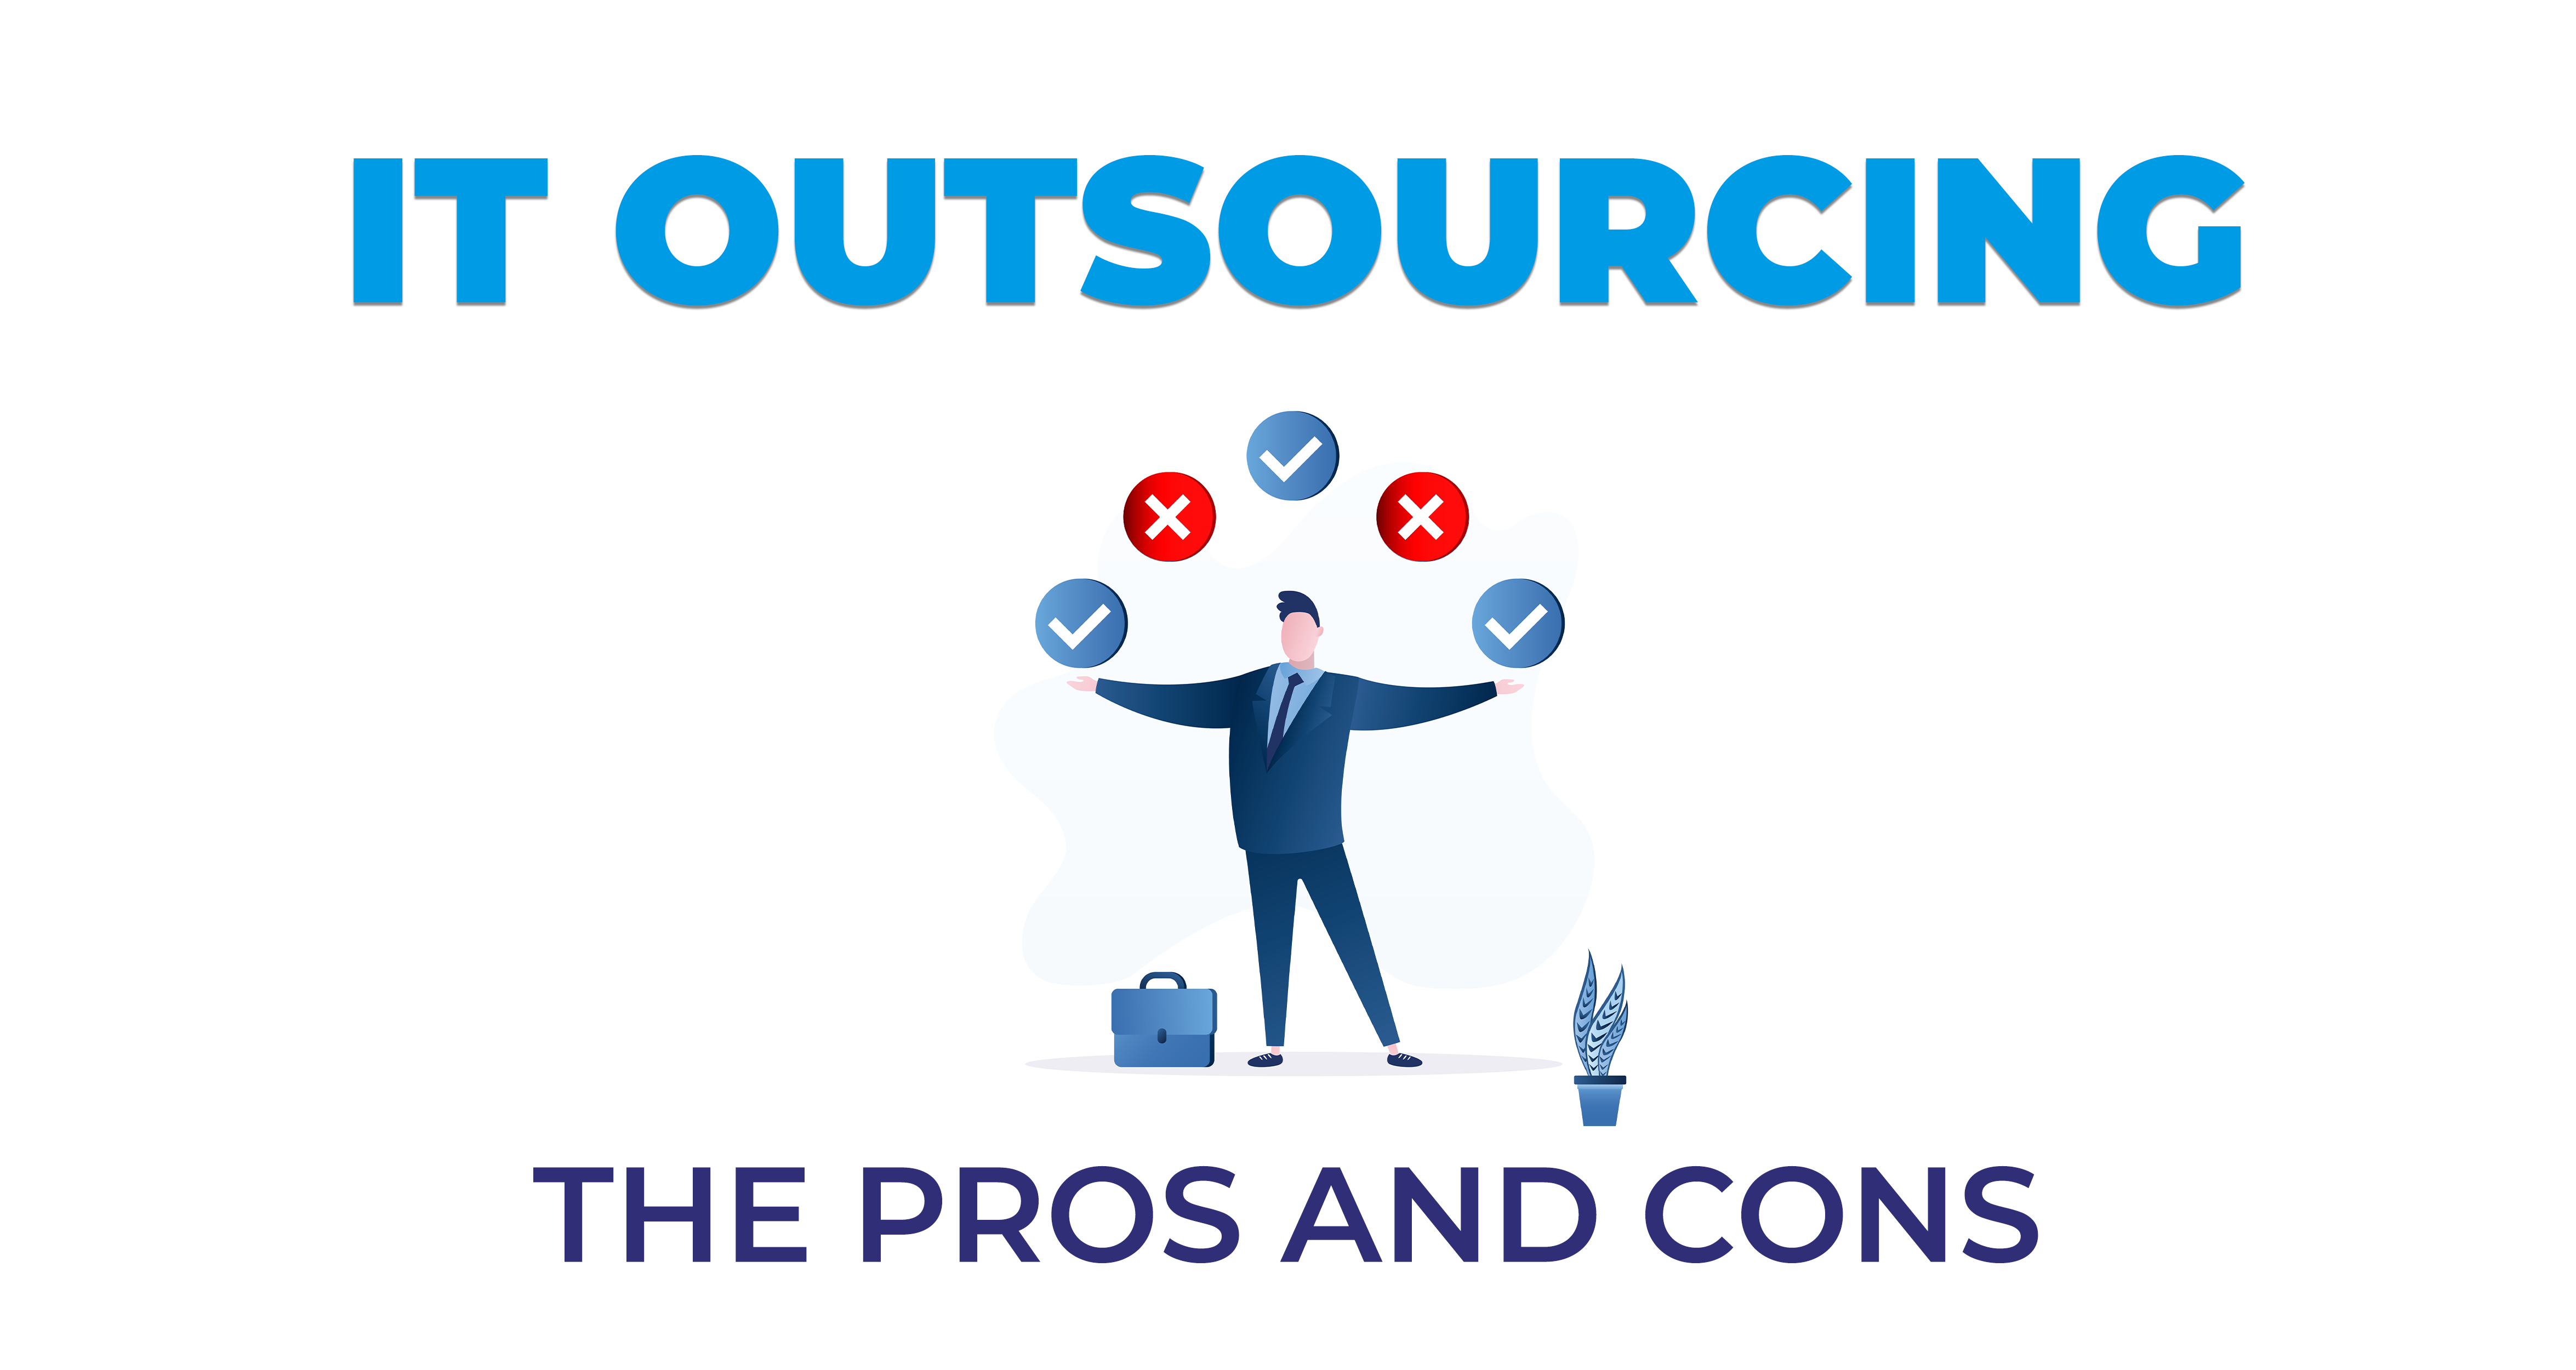 IT Outsourcing - The Pros and Cons